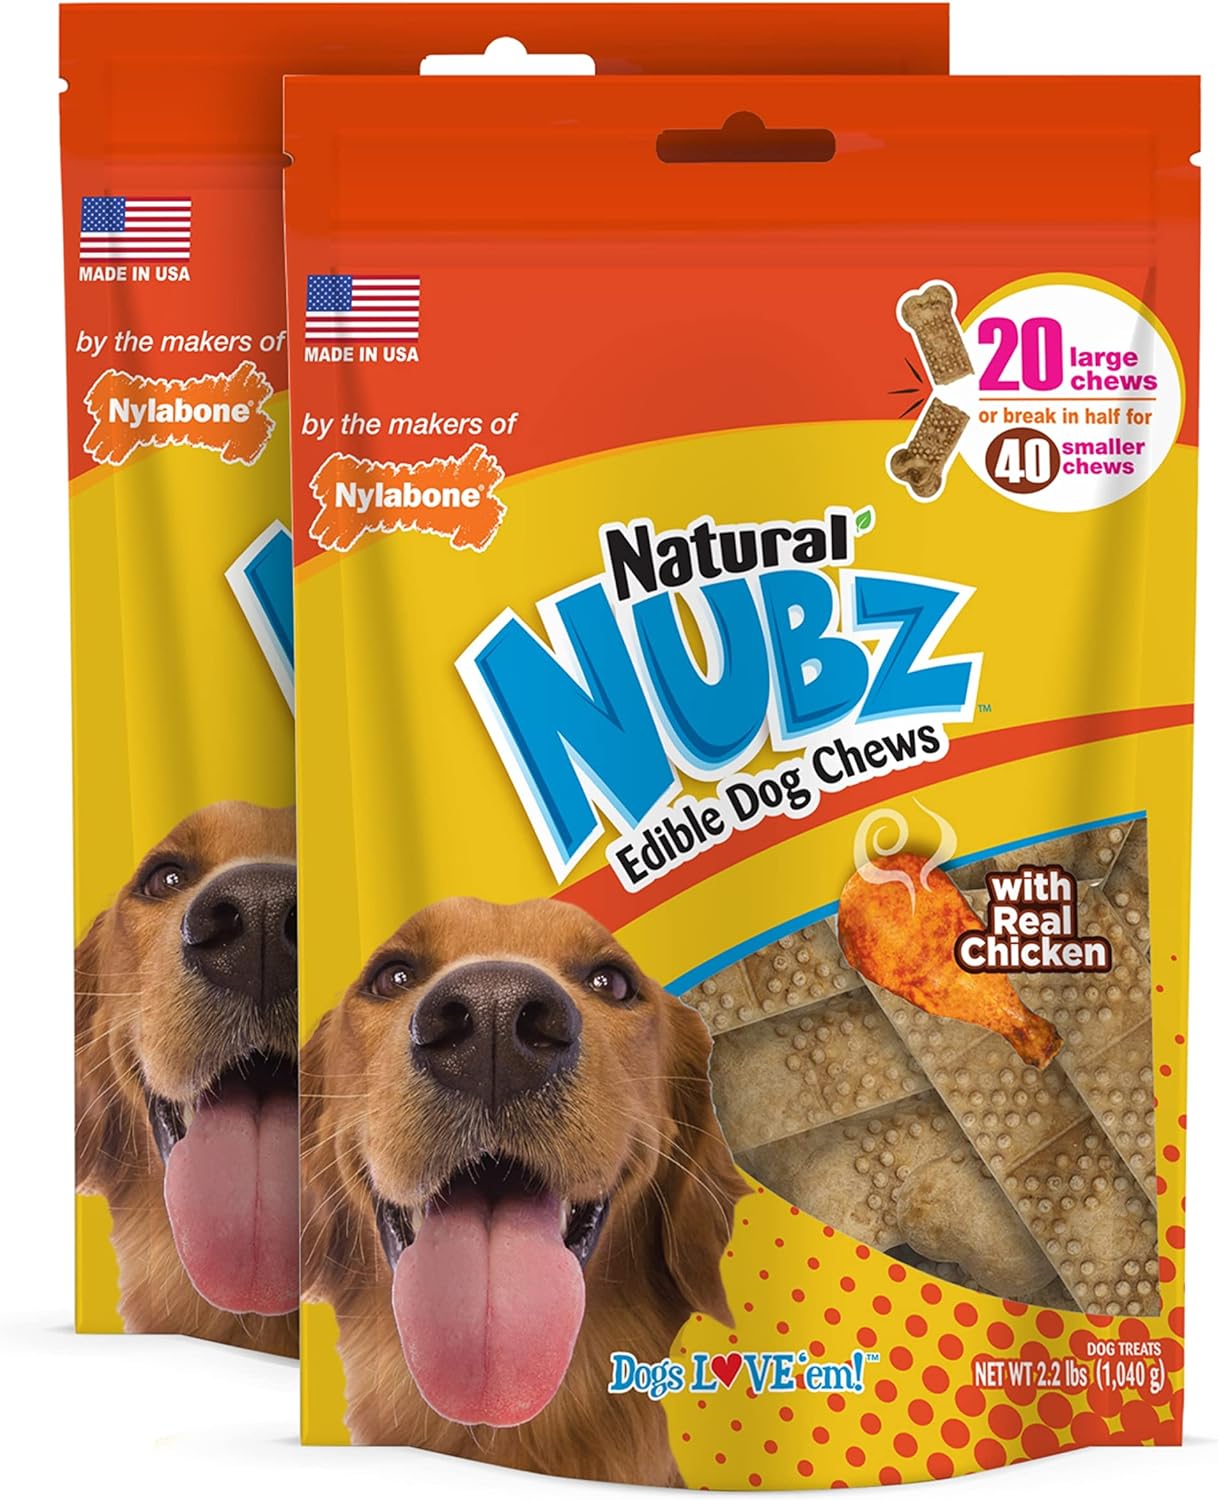 Nylabone Nubz Chicken Dog Treats I All Natural Edible Chew Treats for Dogs l Made in USA l 2 (20 count) Large - 30+ lbs